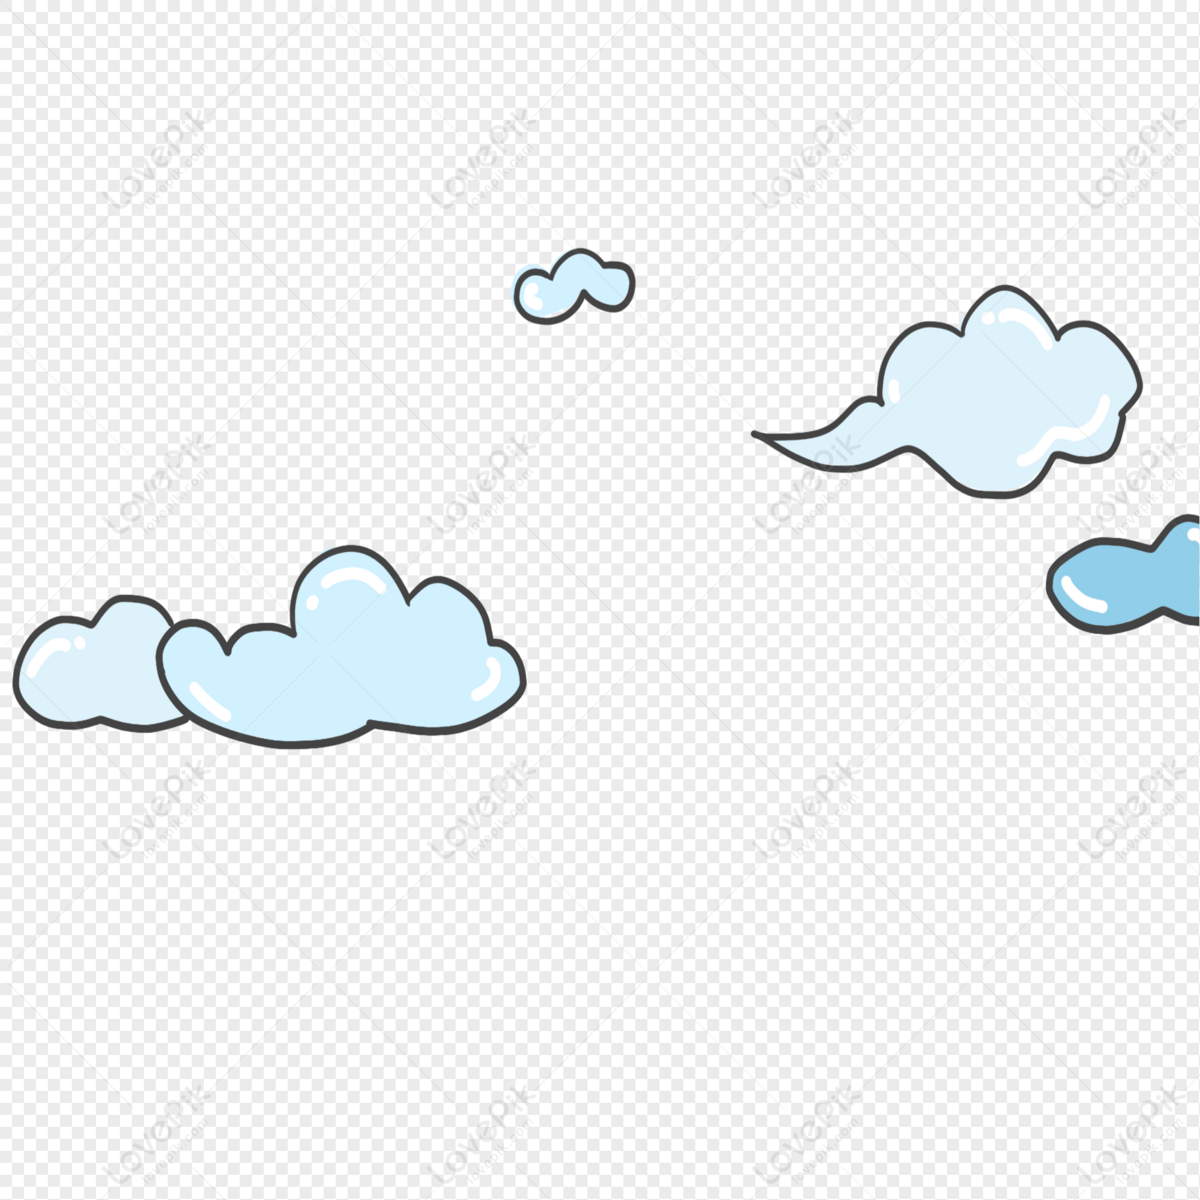 Cartoon Cloud PNG Transparent Background And Clipart Image For Free  Download - Lovepik | 401188450